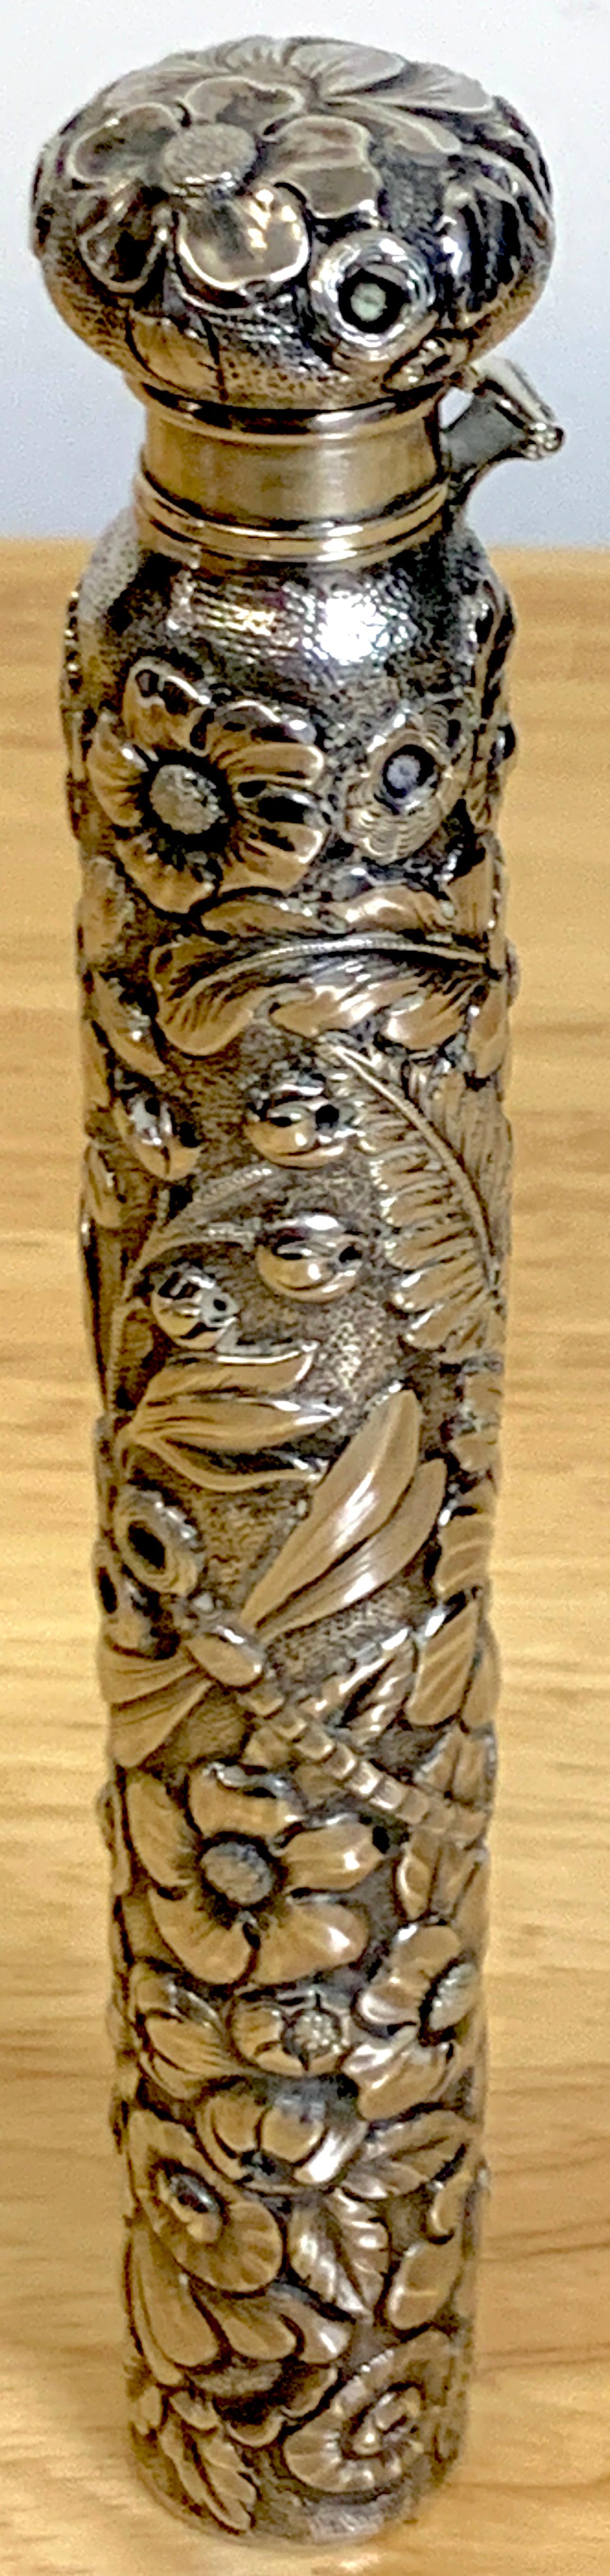 19th Century Large Dominick & Haff Aesthetic Sterling Perfume or Flask with Dragon Fly For Sale